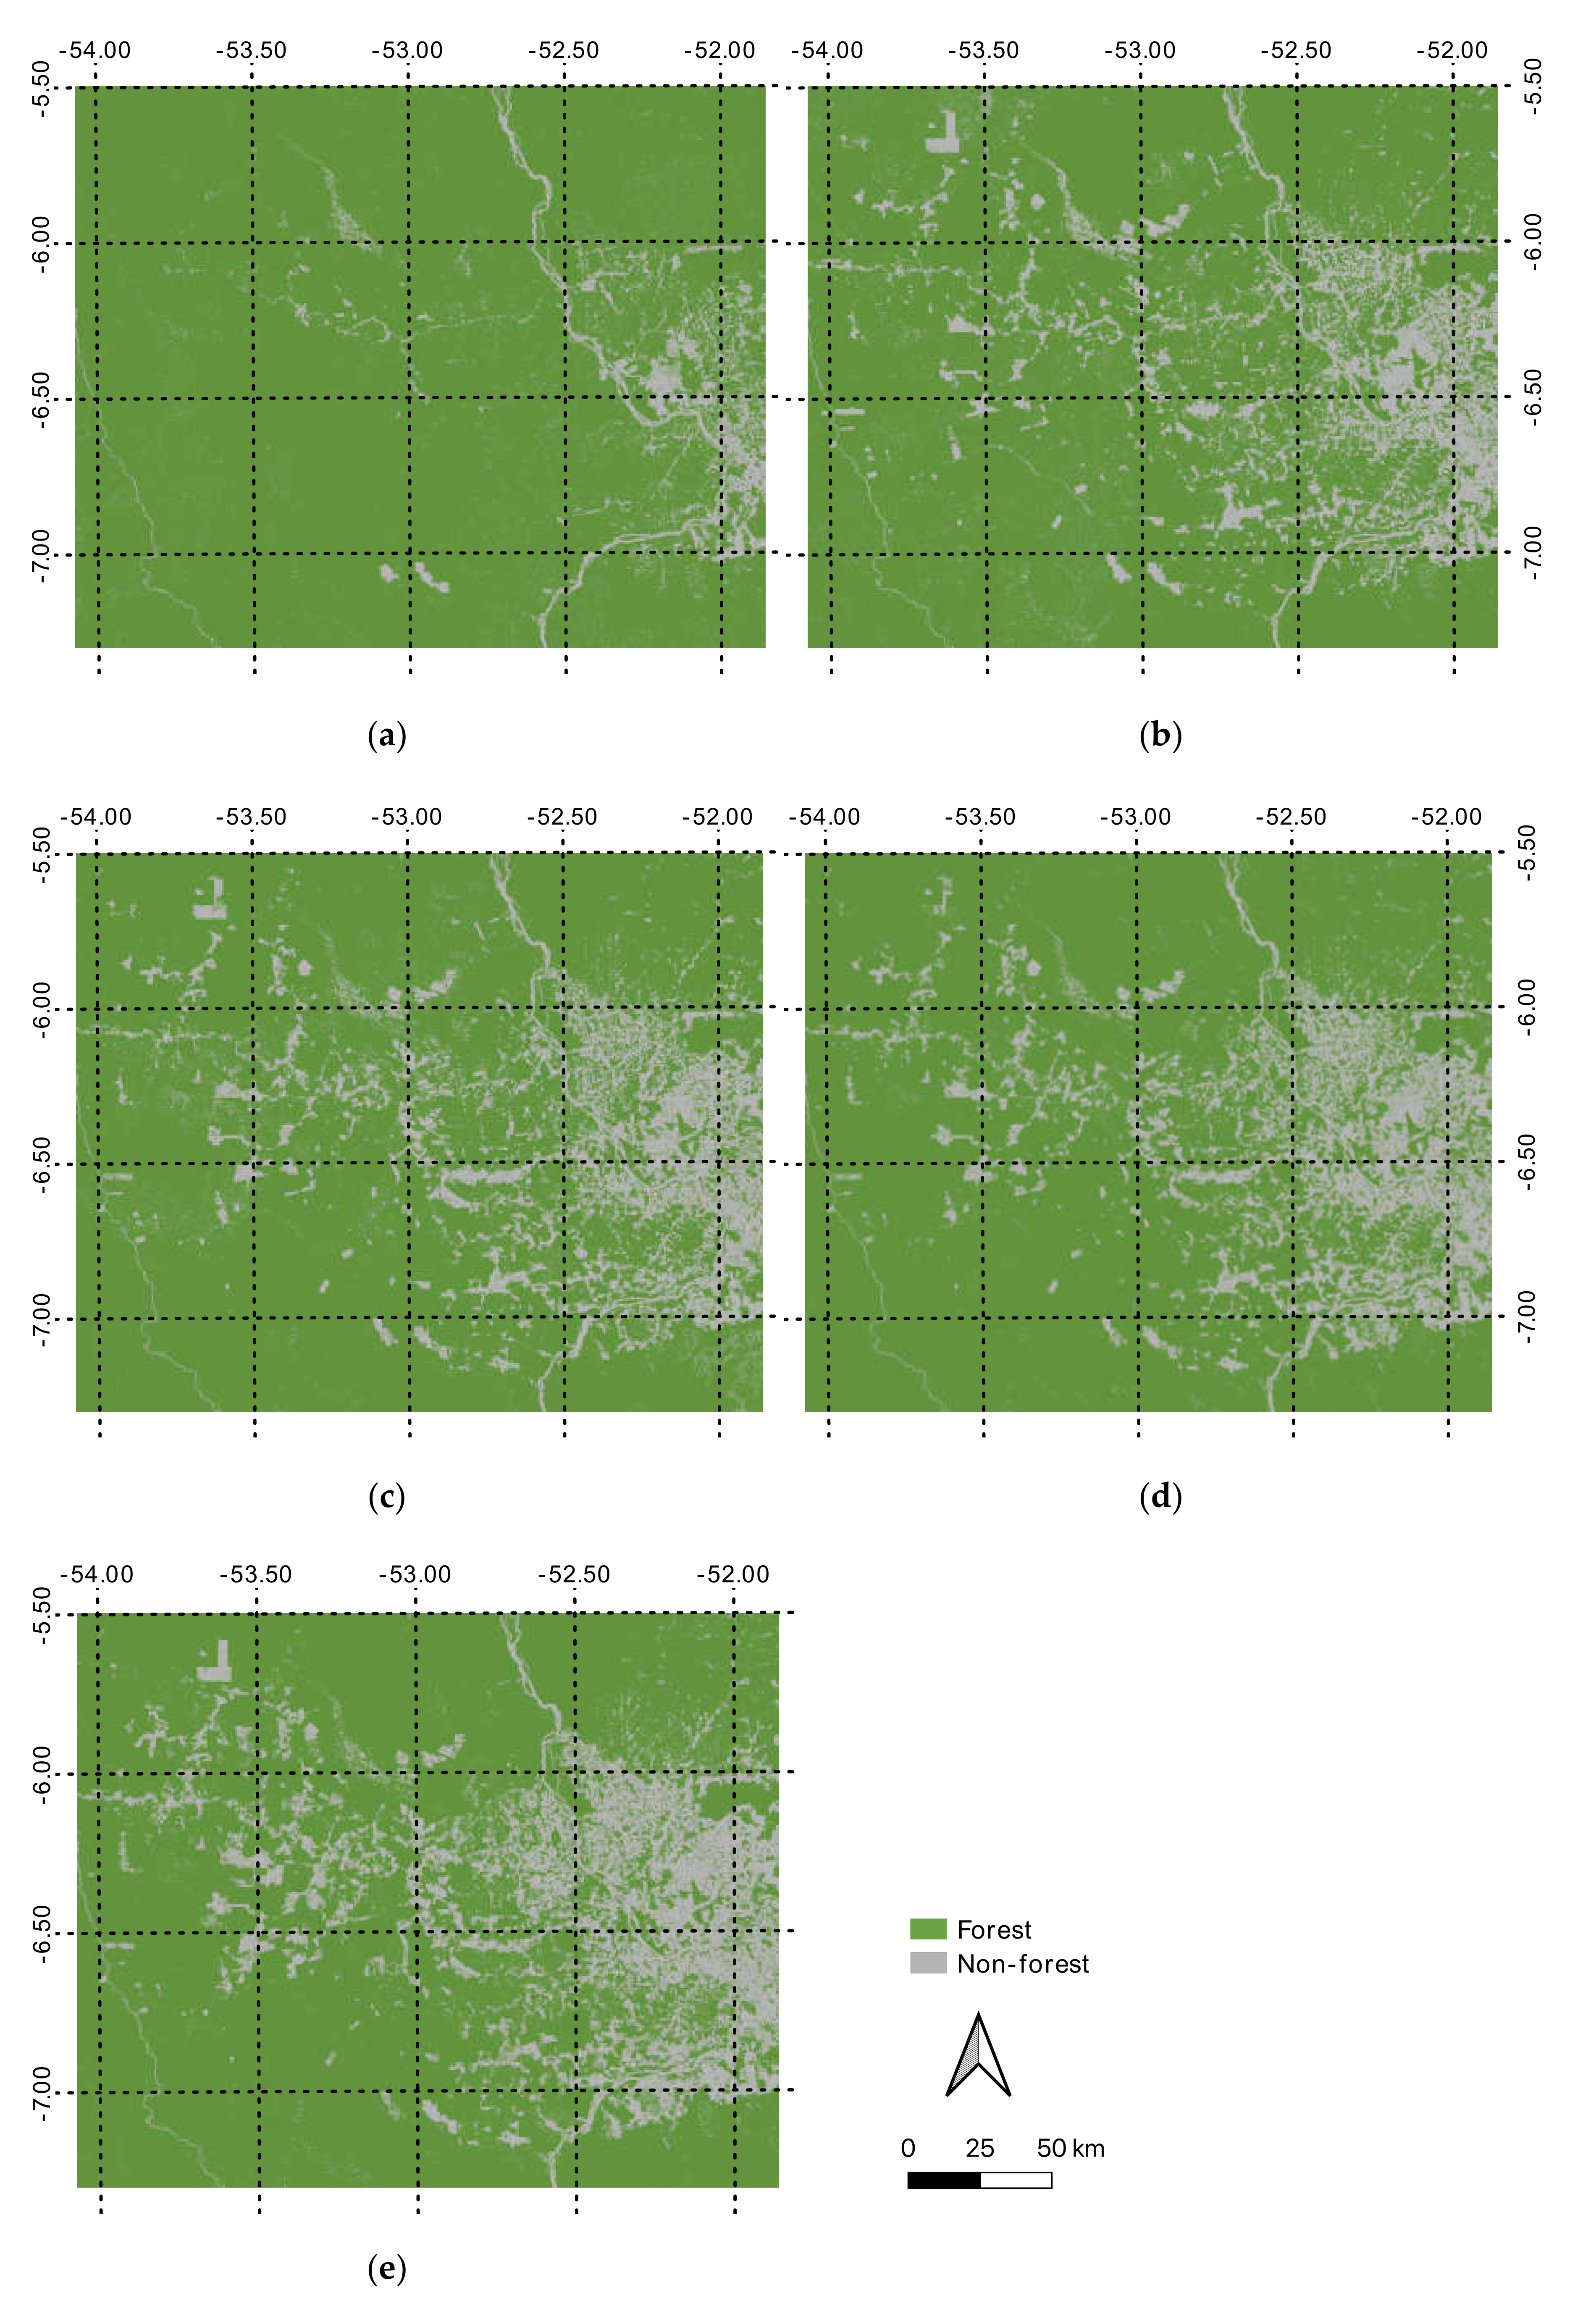 IJGI | Free Full-Text | Monitoring Forest Change in the Amazon Using  Multi-Temporal Remote Sensing Data and Machine Learning Classification on  Google Earth Engine | HTML